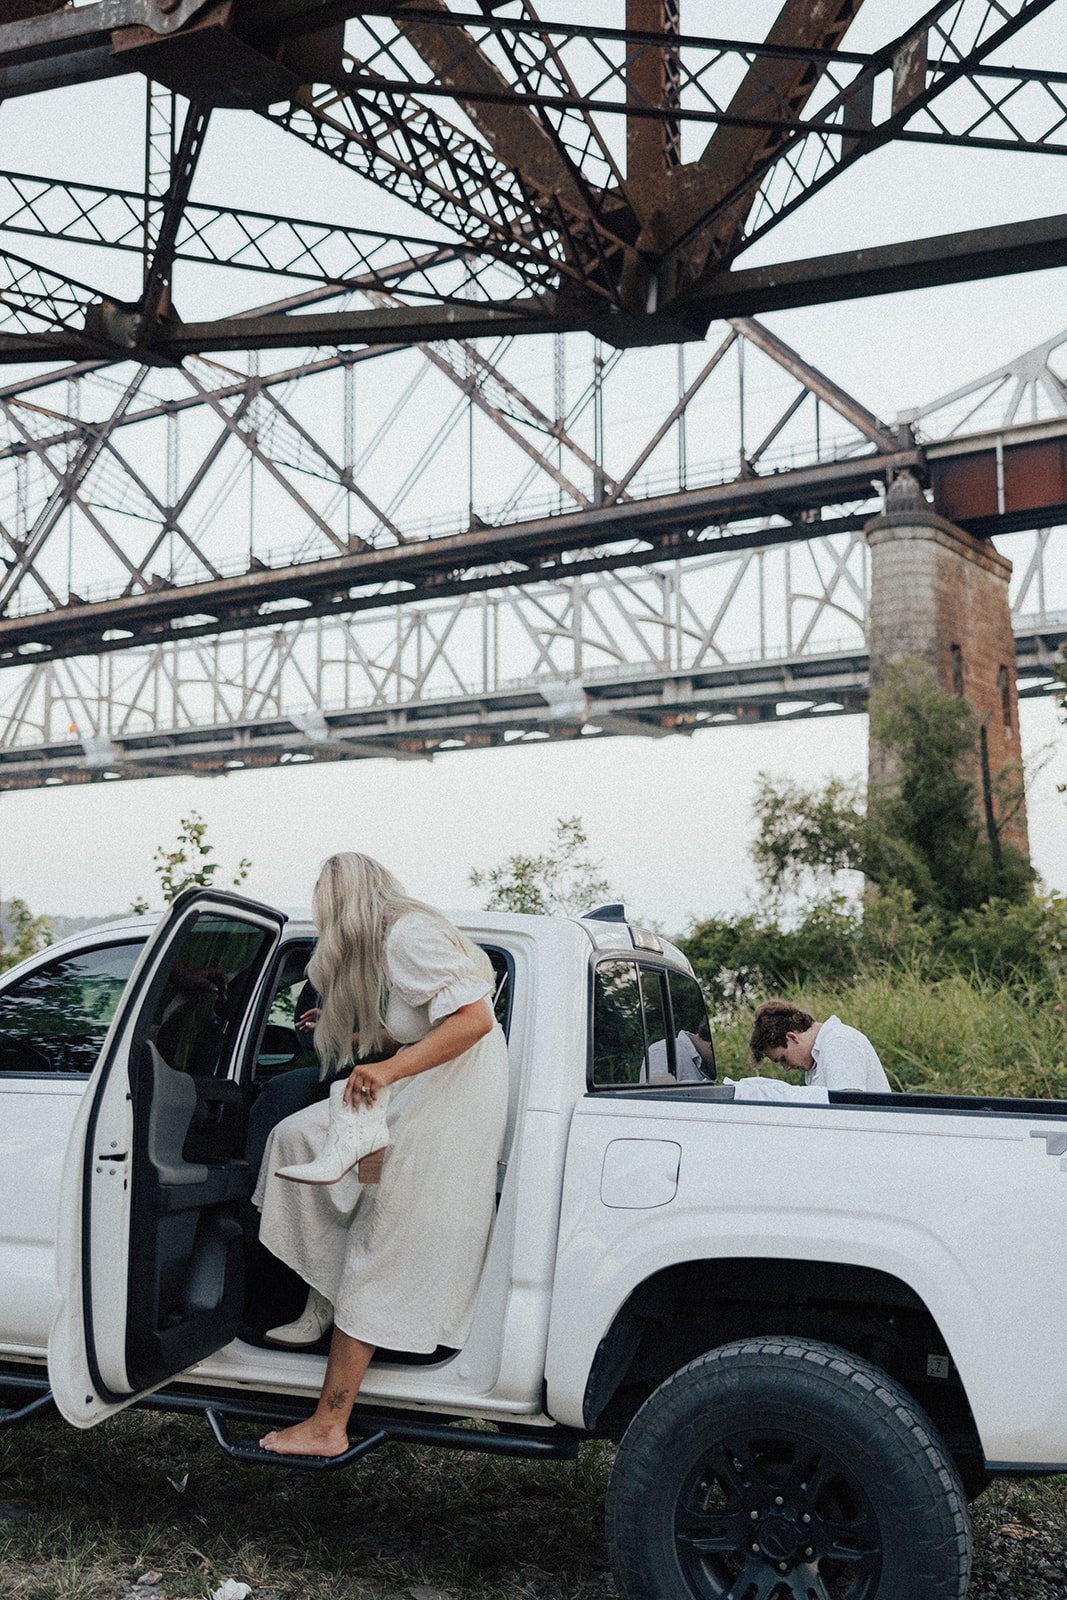 hannah-and-trey-parking-can-be-fun-downtown-memphis-river-walk-mississippi-beach-tennessee-wedding-photographer-jo-darling-photography-192.jpg